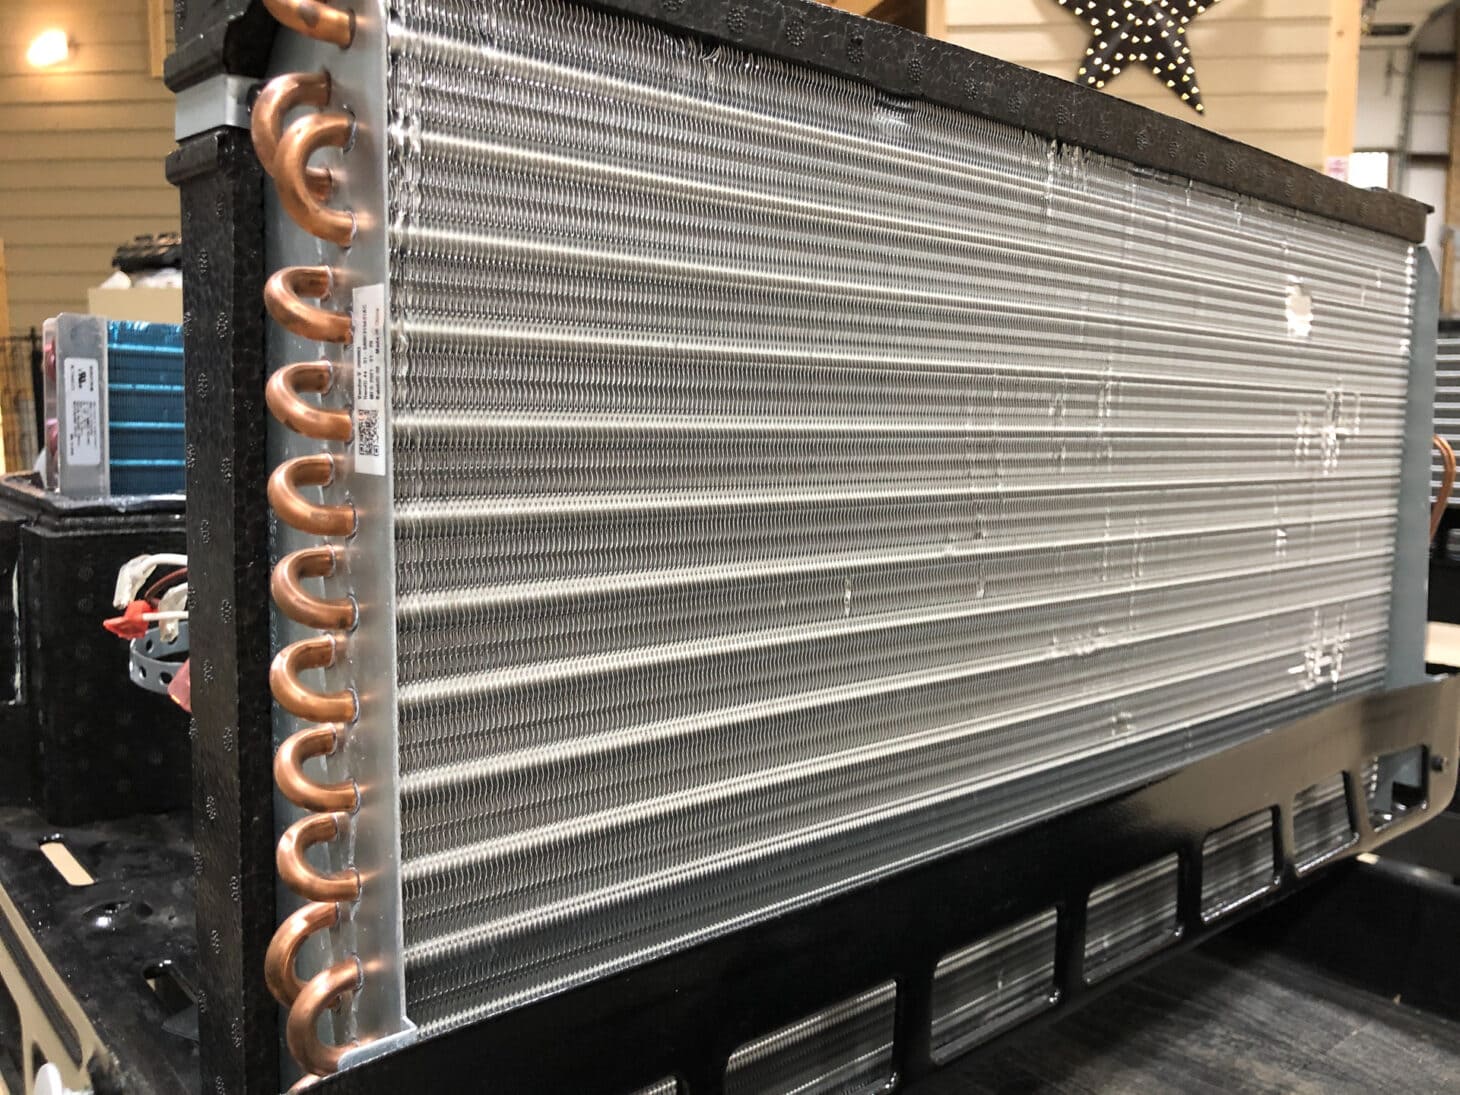 The condenser coils in an RV air conditioner unit